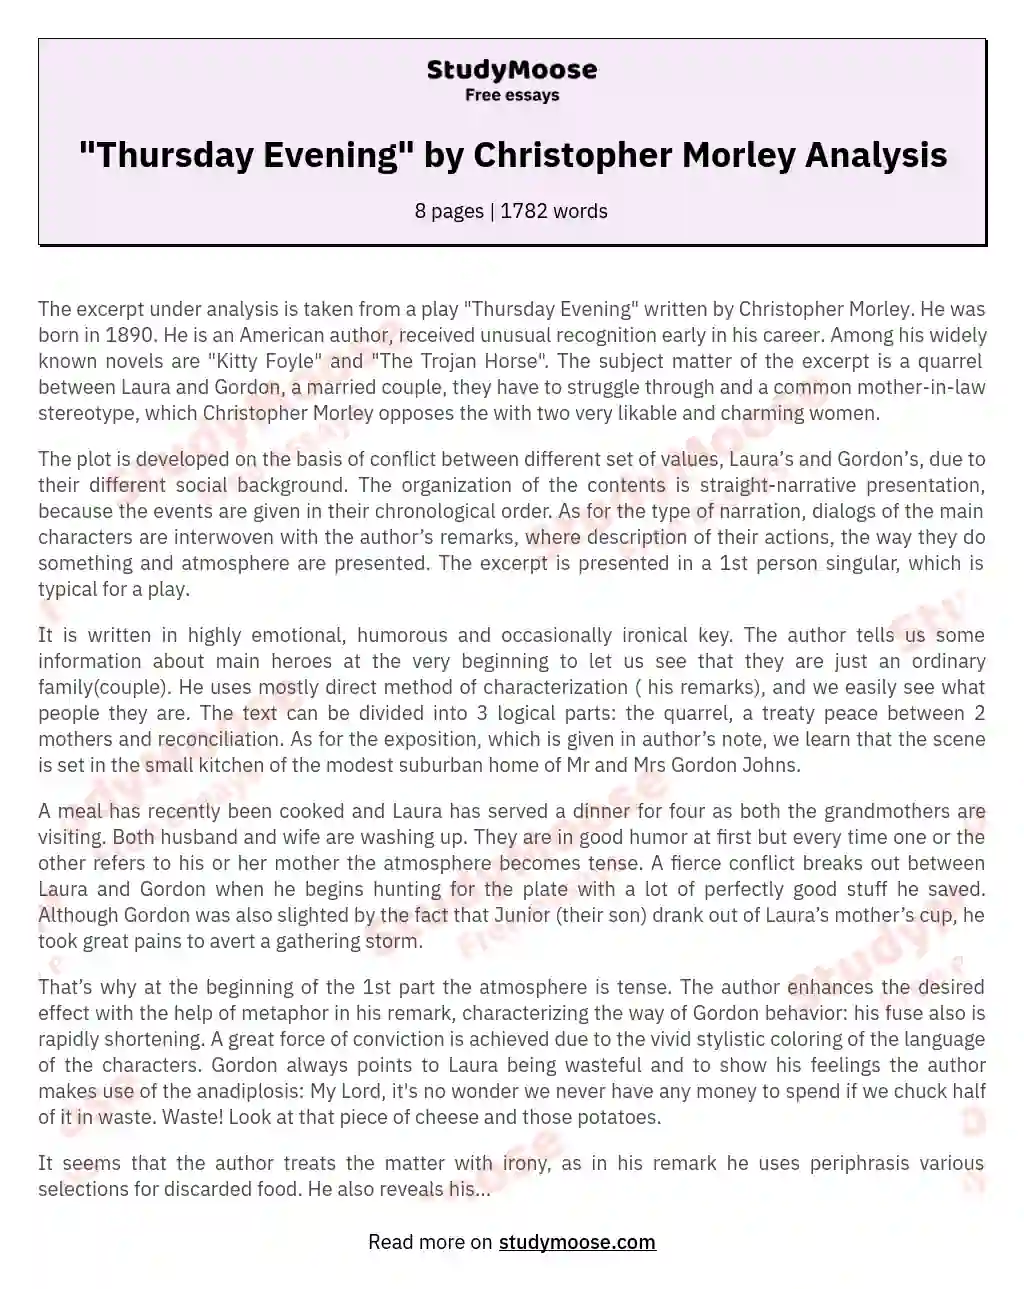 "Thursday Evening" by Christopher Morley Analysis essay